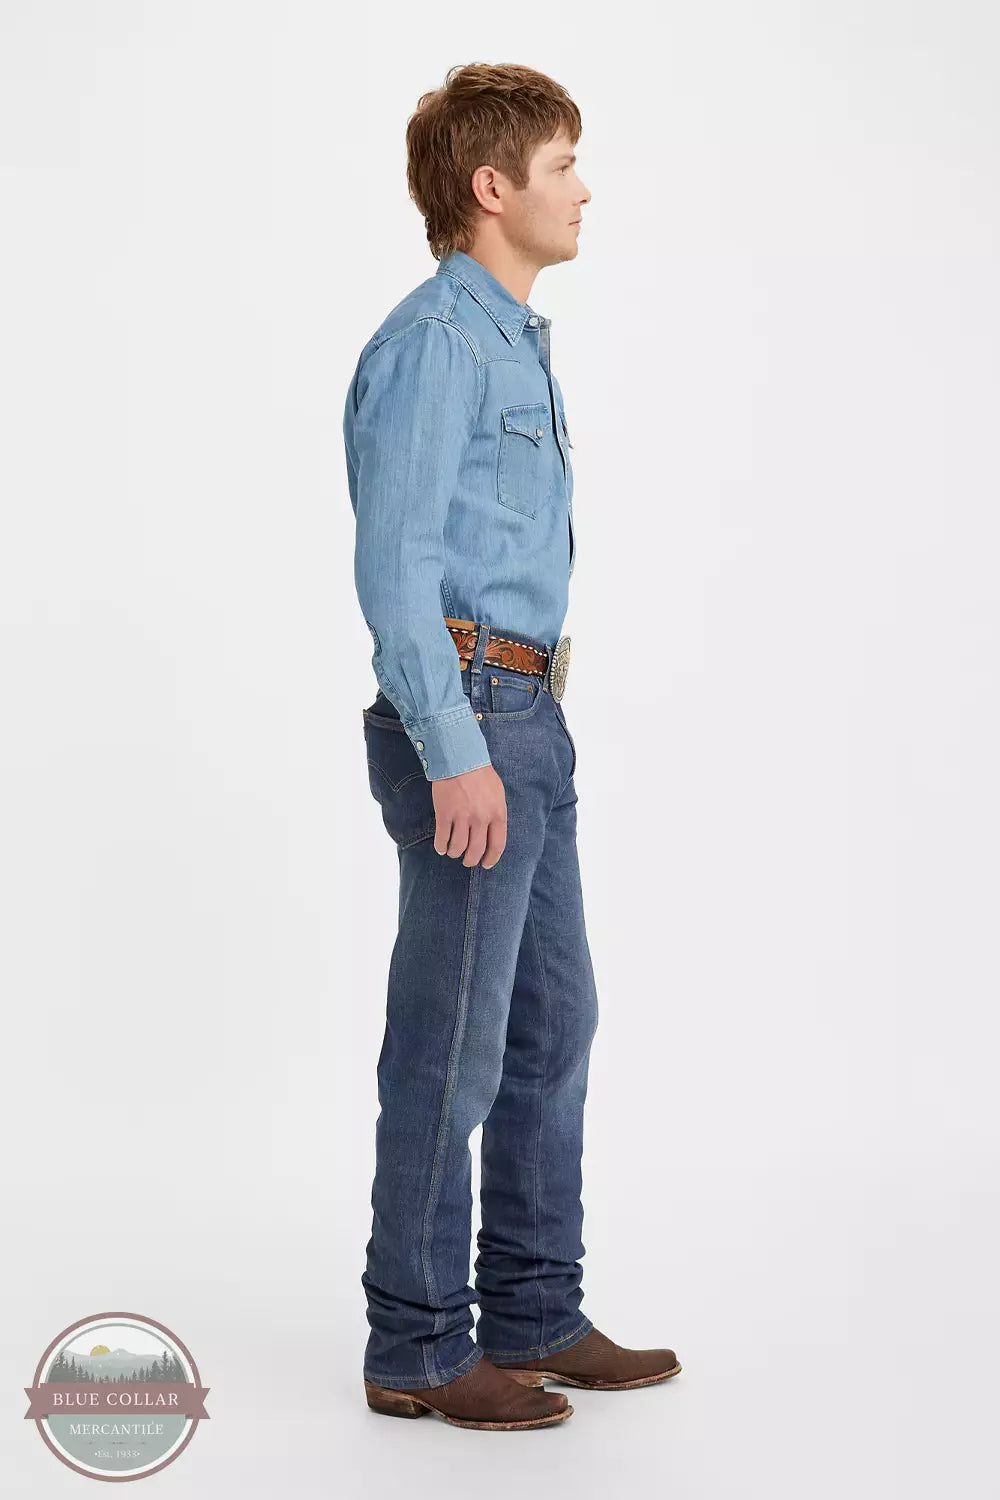 Levi's 37681-0006 Classic Western Fit Jean in So Lonesome Dark Authentic Wash Side View